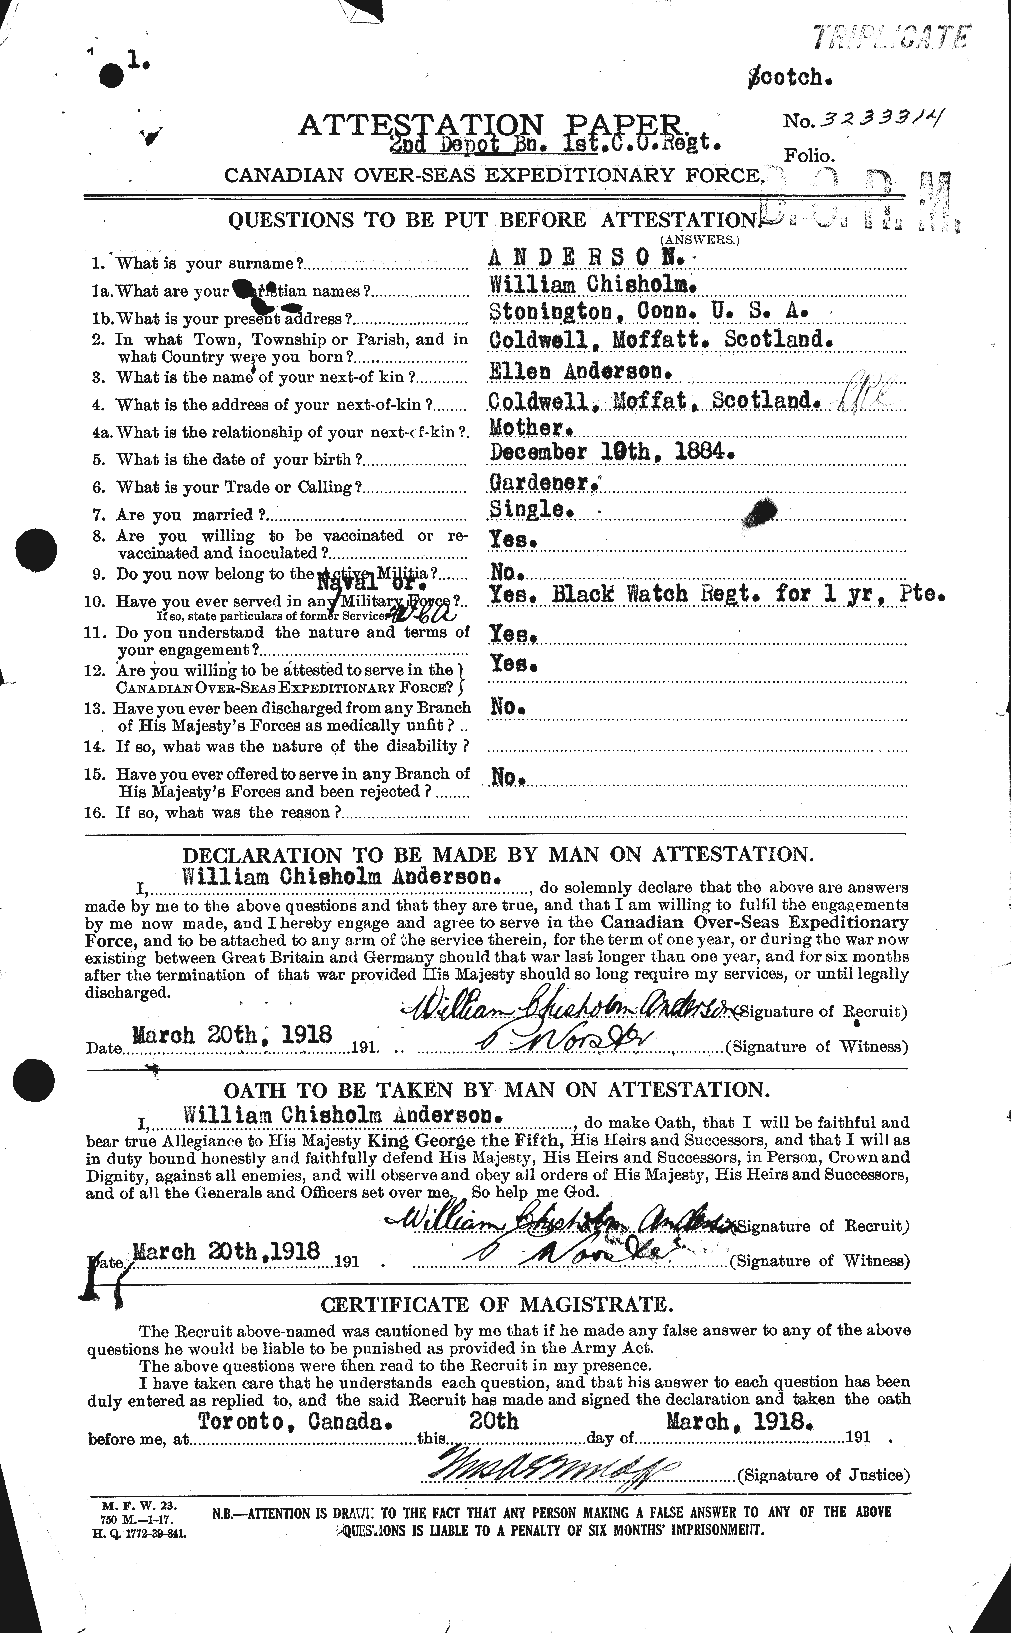 Personnel Records of the First World War - CEF 210786a